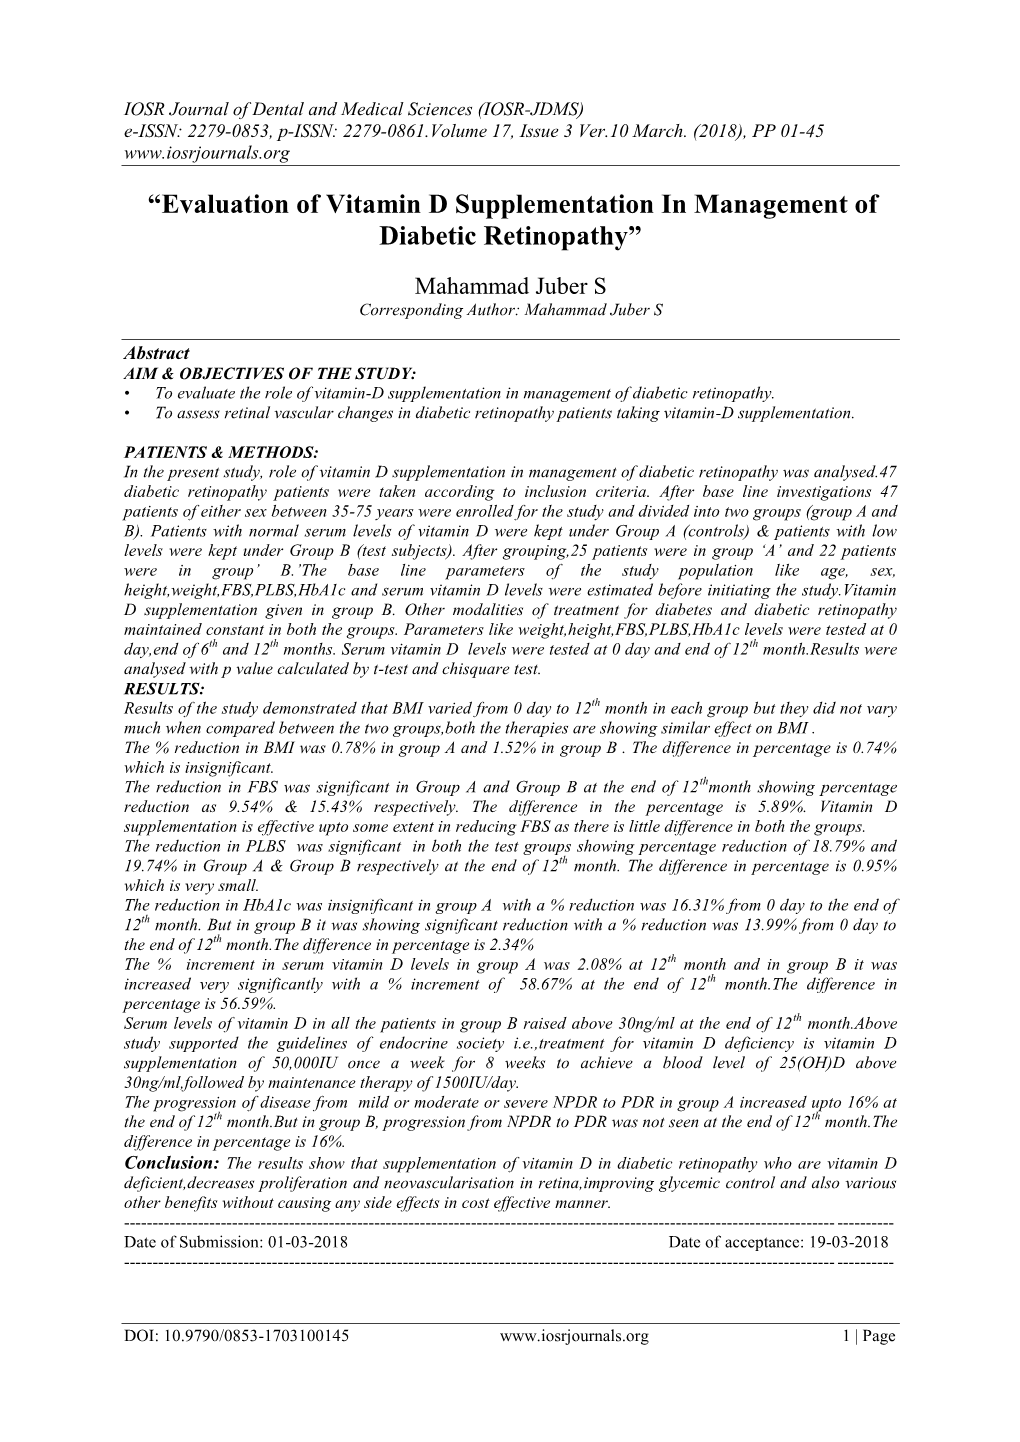 Evaluation of Vitamin D Supplementation in Management of Diabetic Retinopathy”